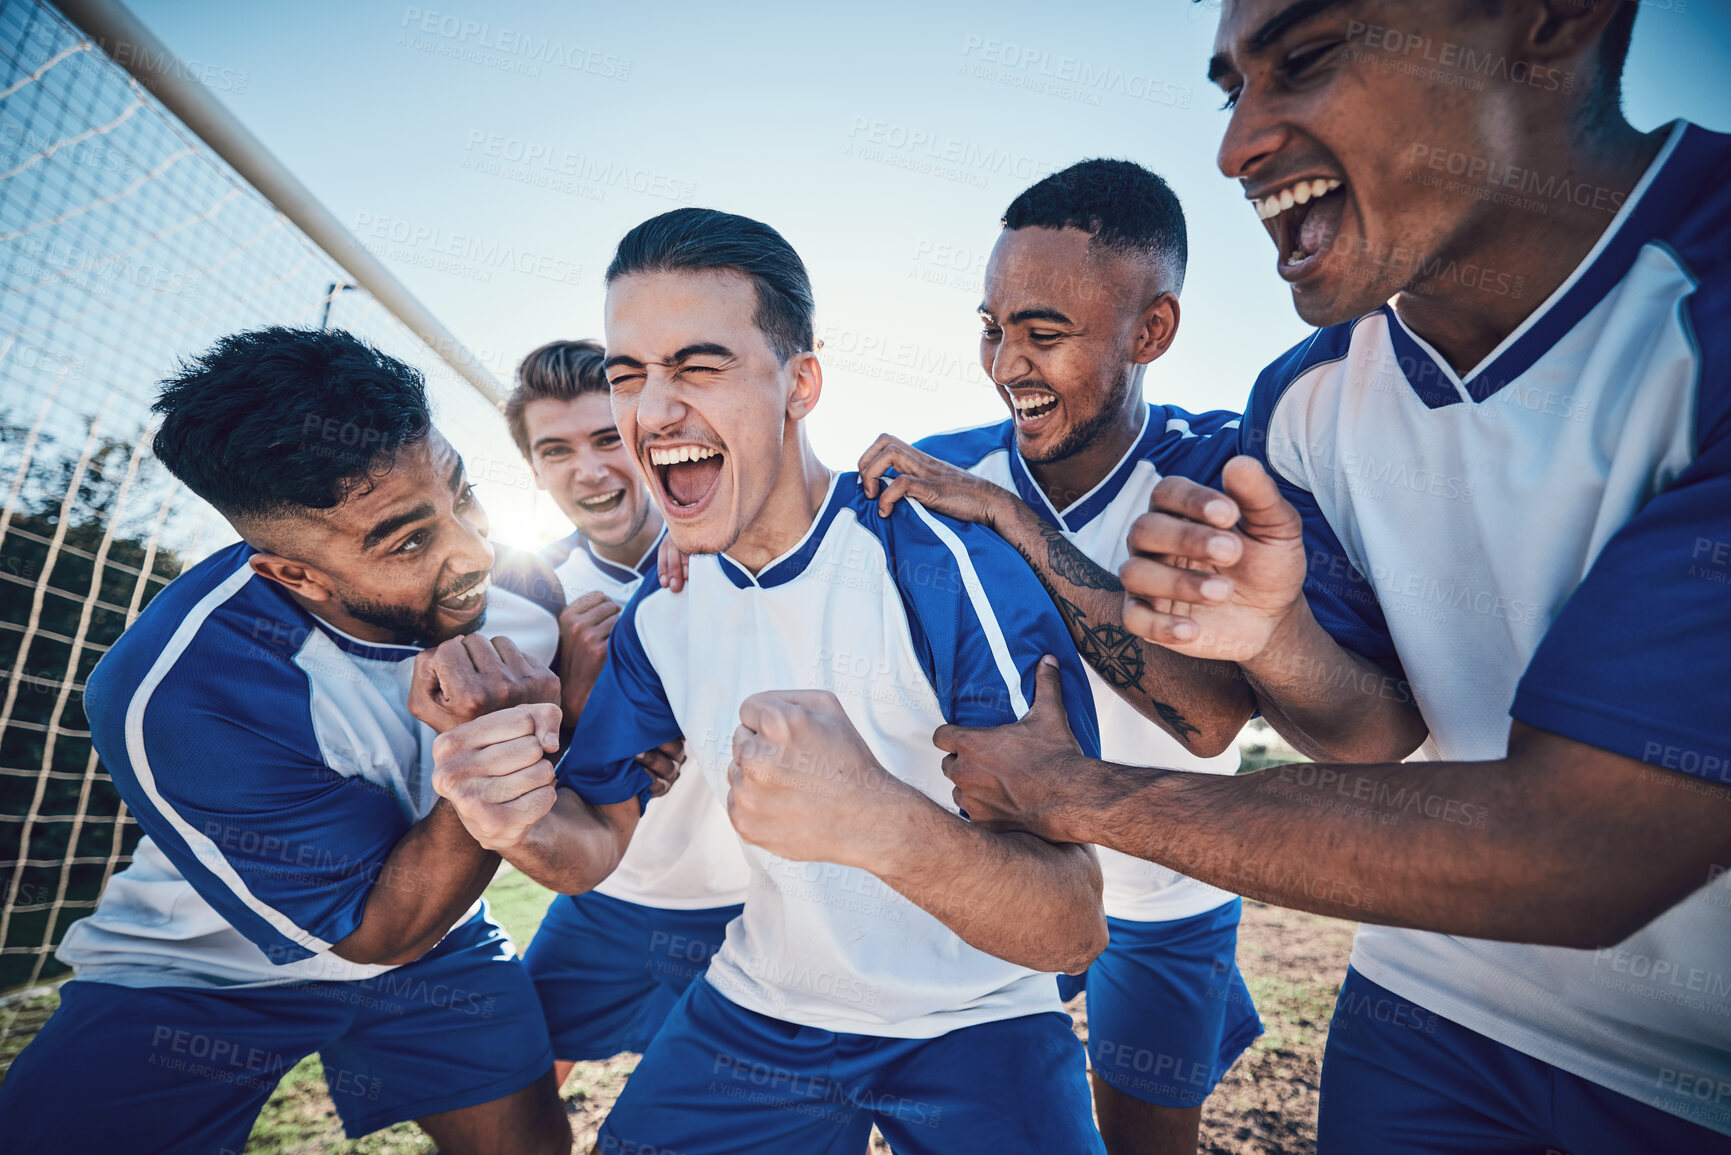 Buy stock photo Winning, goal and soccer with team and achievement, men play game with sports and celebration on field. Energy, action and competition with male athlete group, cheers and happiness with success